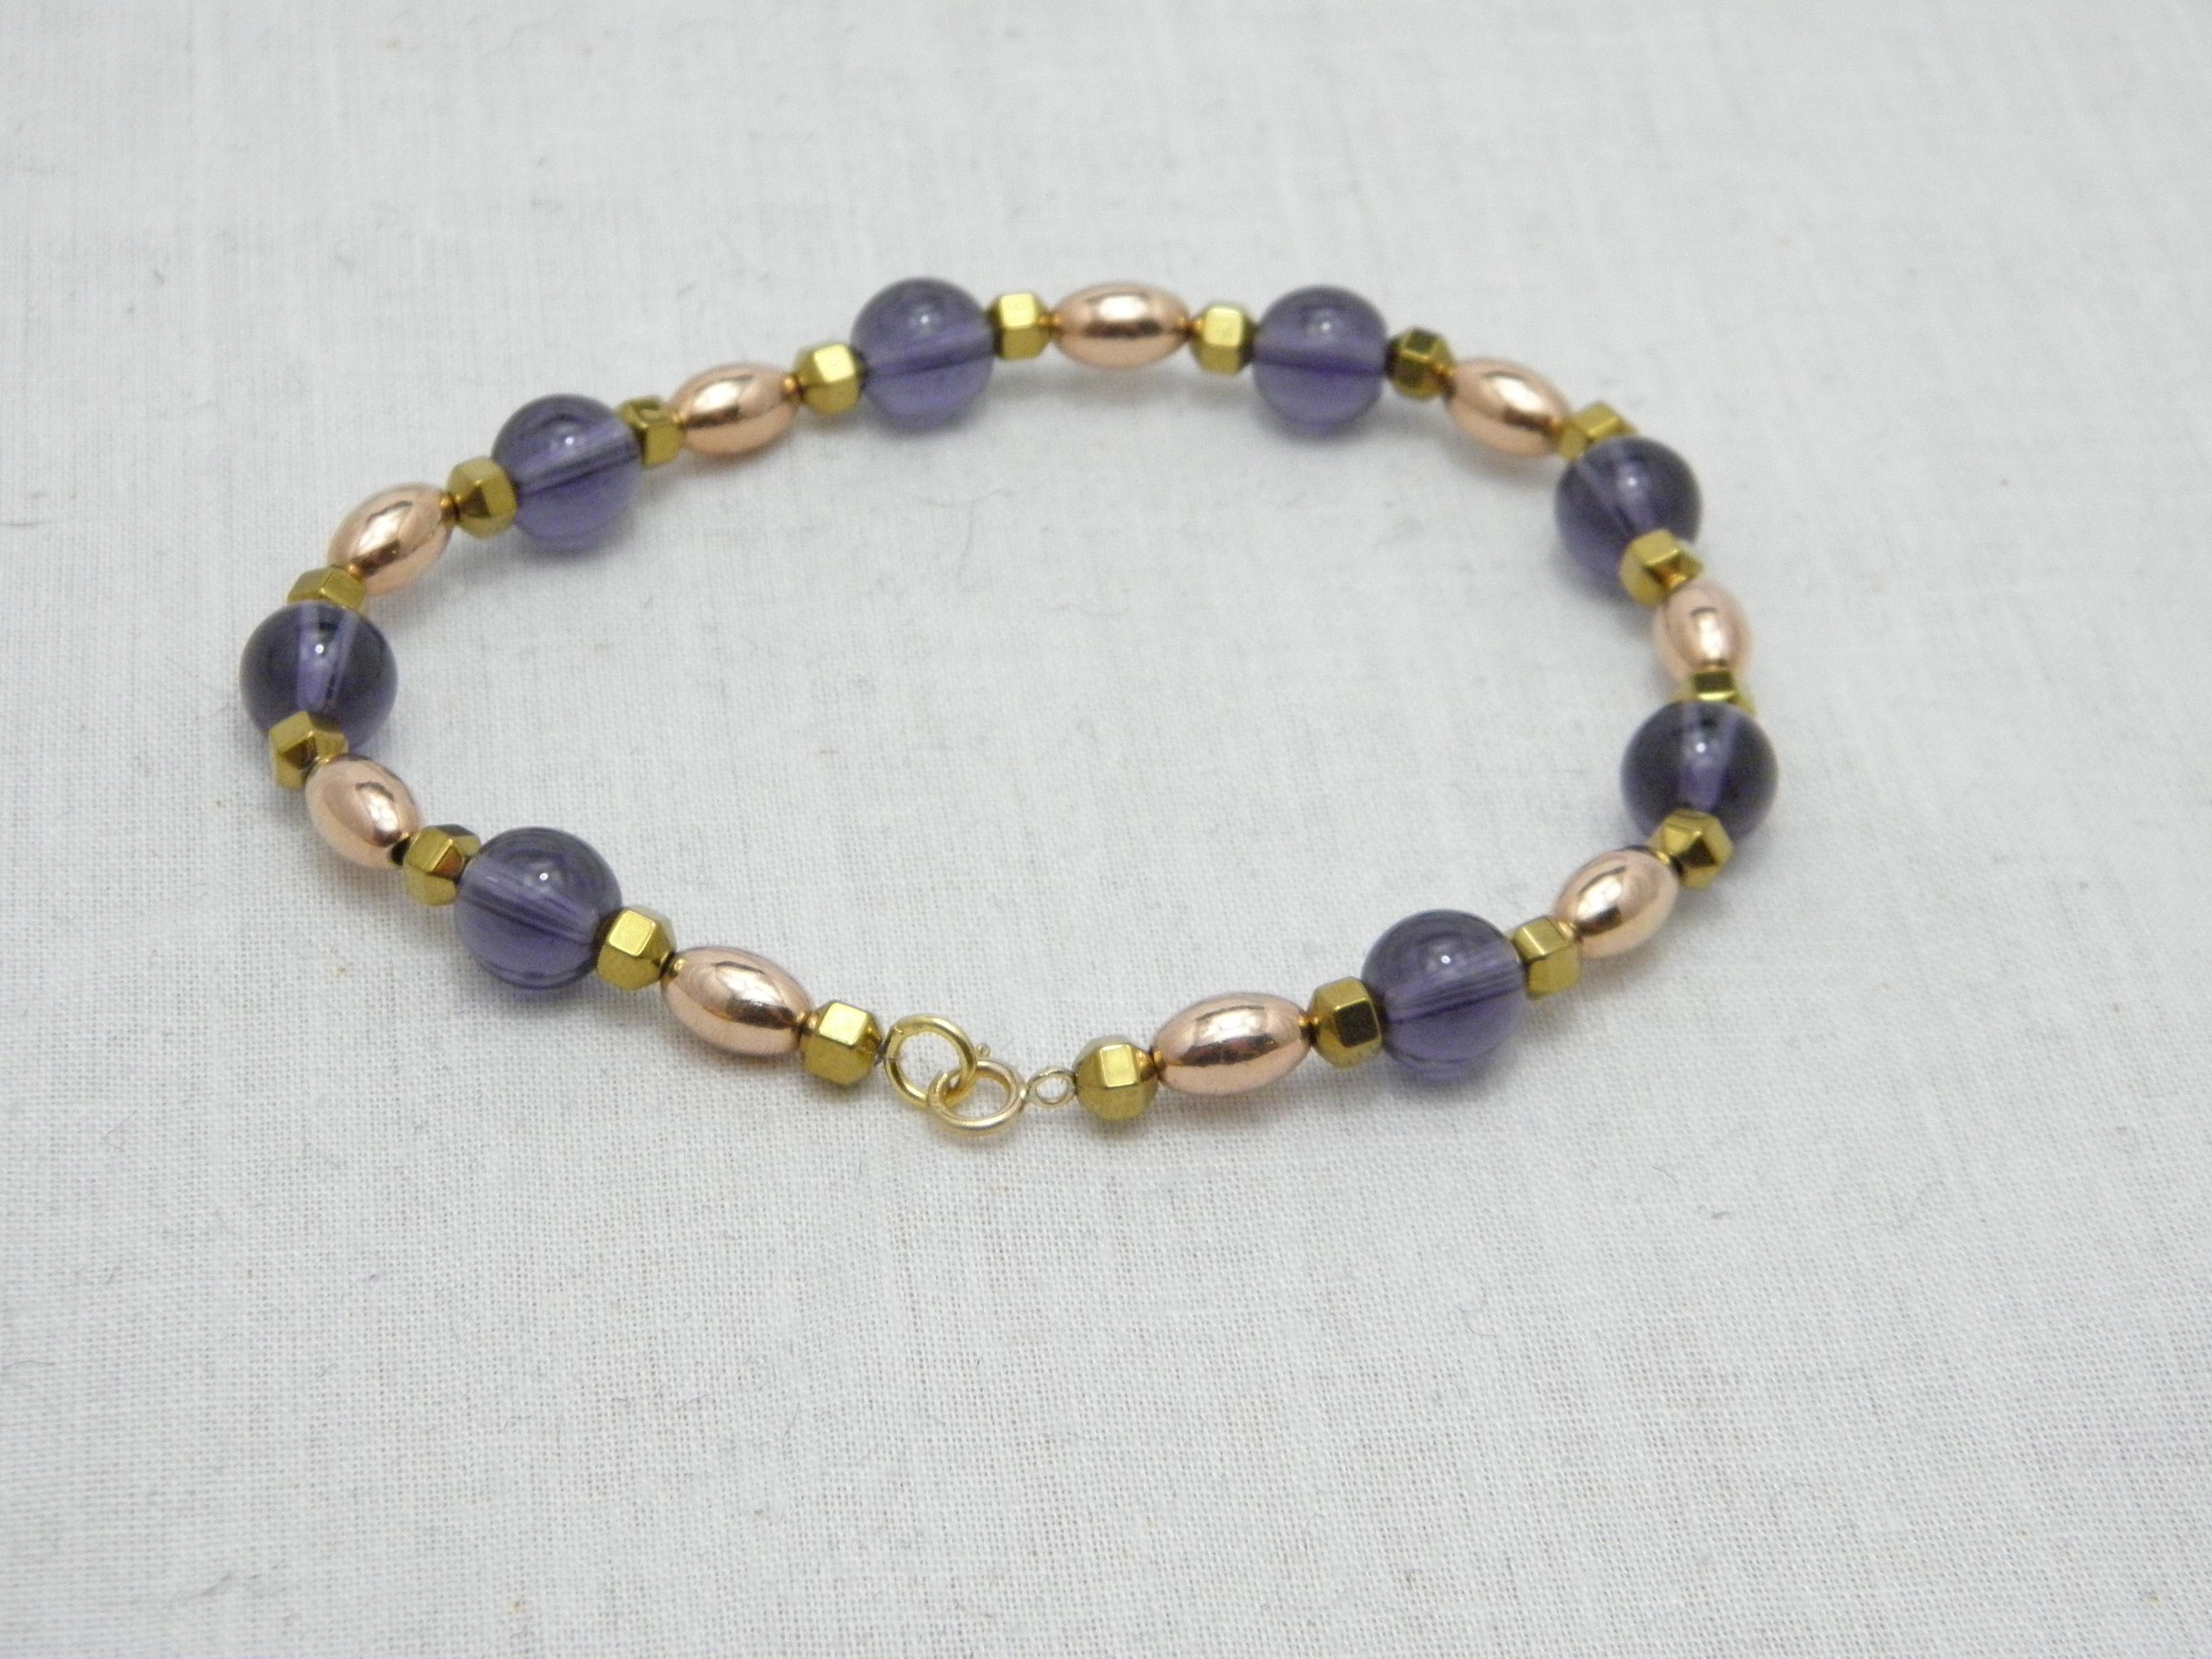 Vintage 9ct Gold Heavy Amethyst Bracelet 375 Purity Round Bead 9.9g For Sale 1